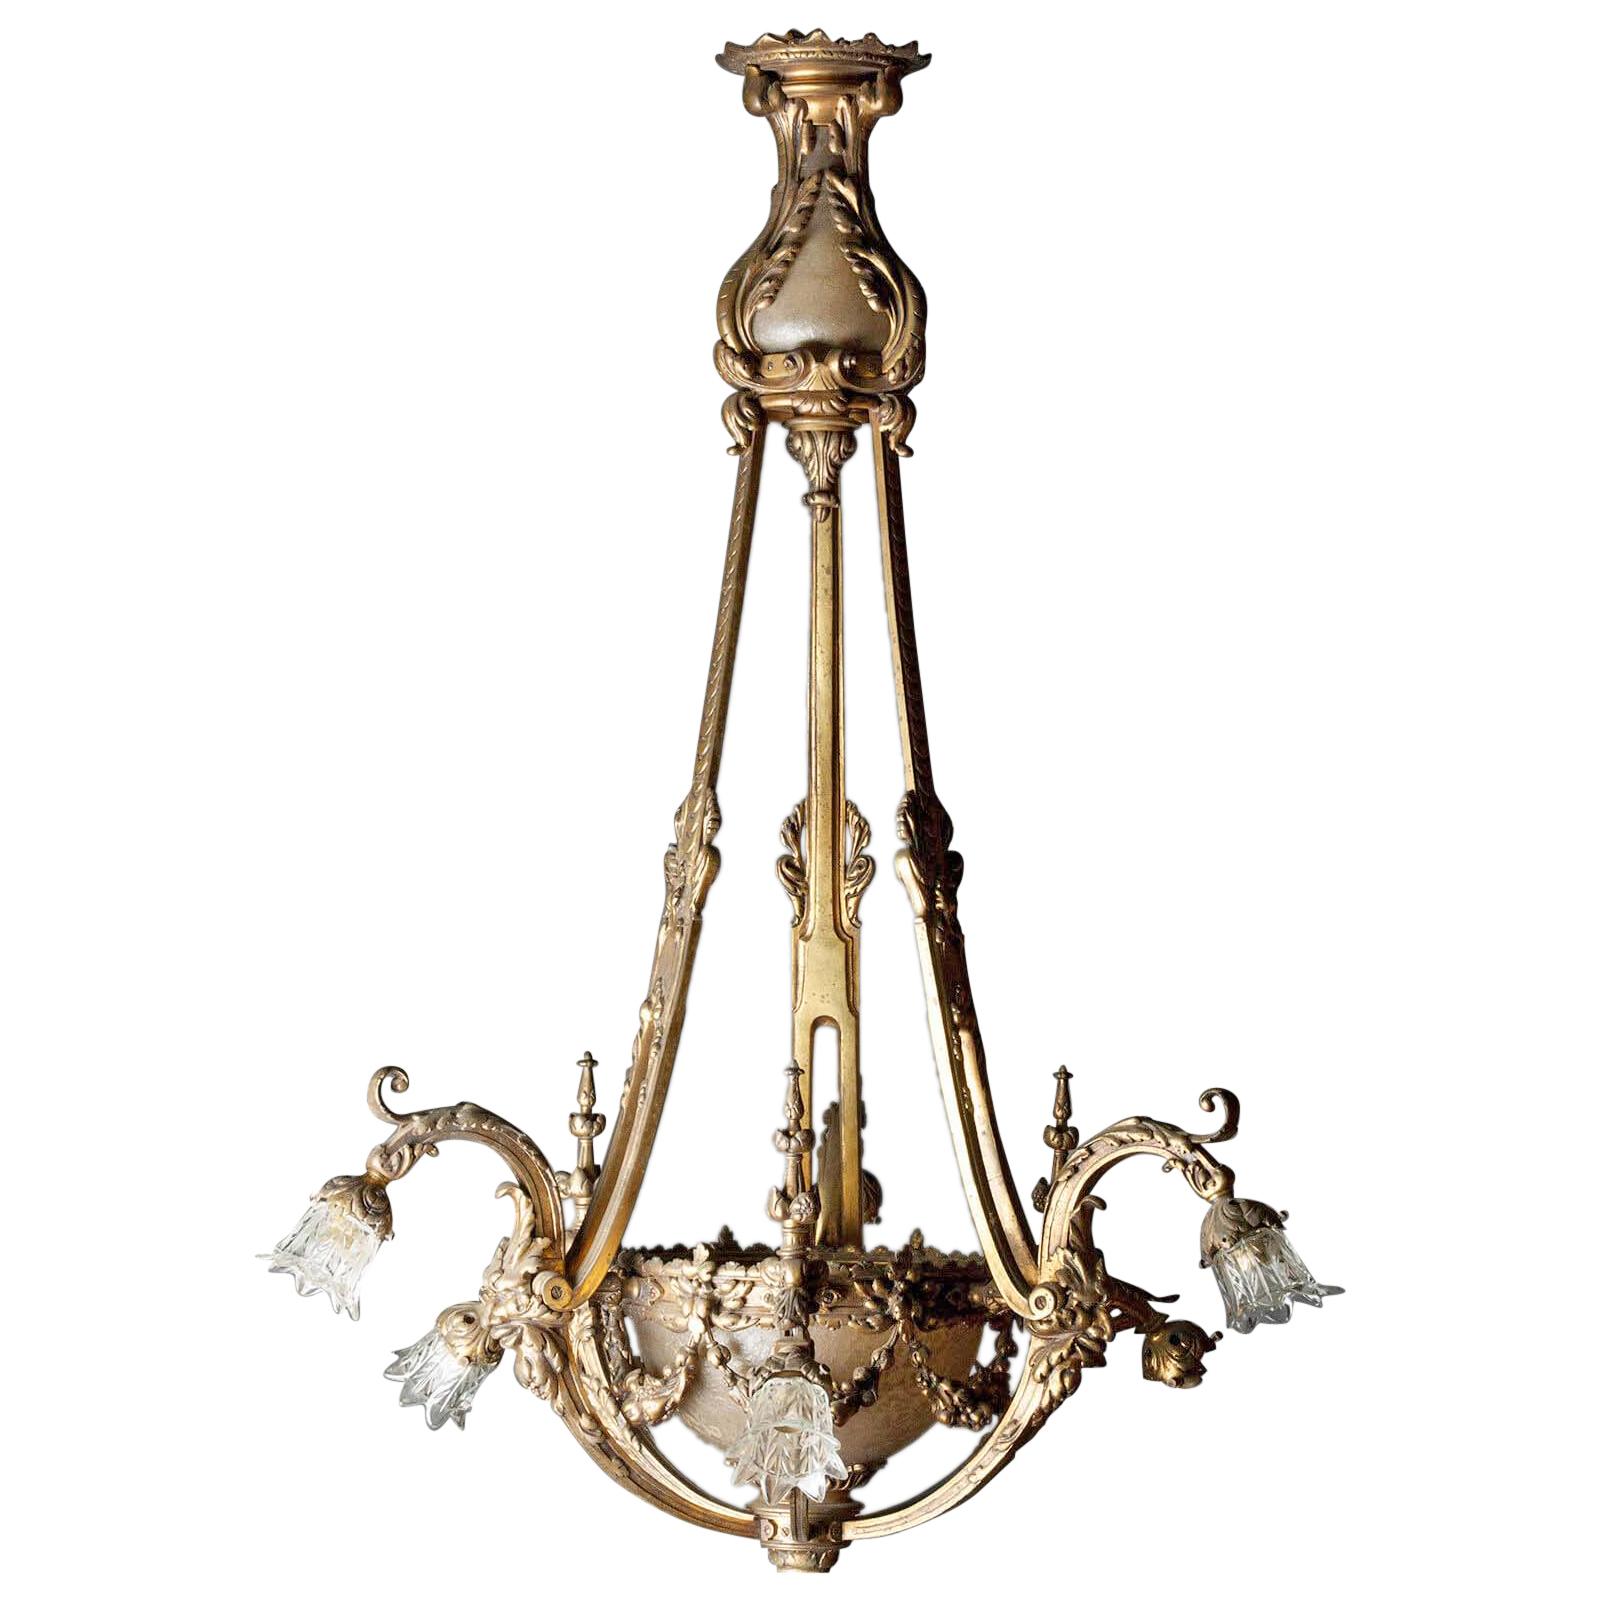 Heavy Bronze Chandelier with Glass Bowl, France, Early 20th Century